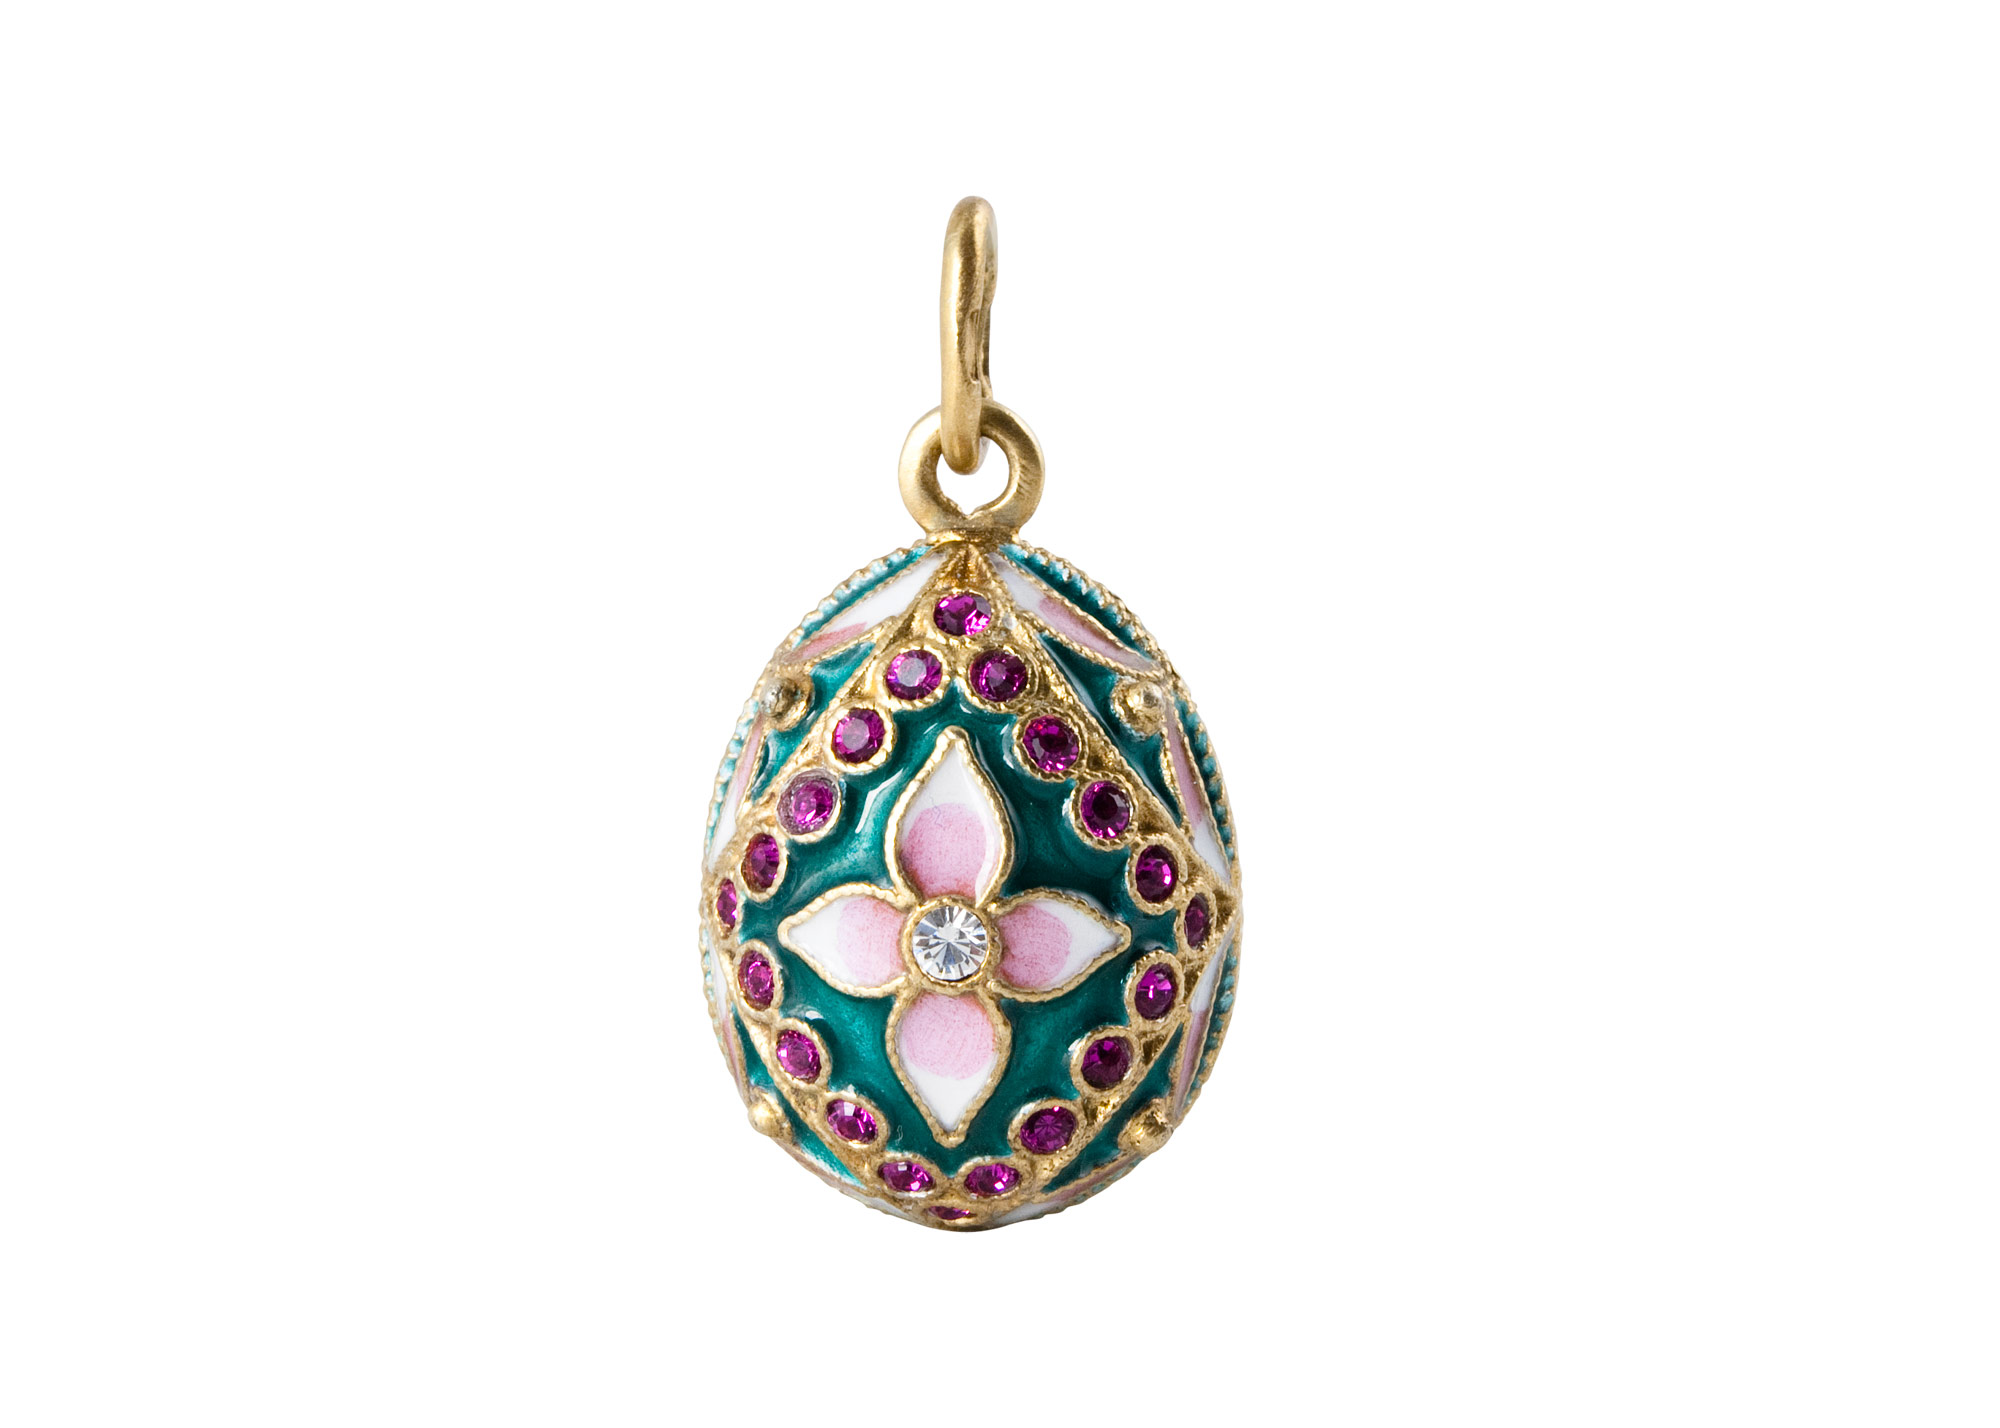 Buy Square Flower Green and Pink Pendant at GoldenCockerel.com